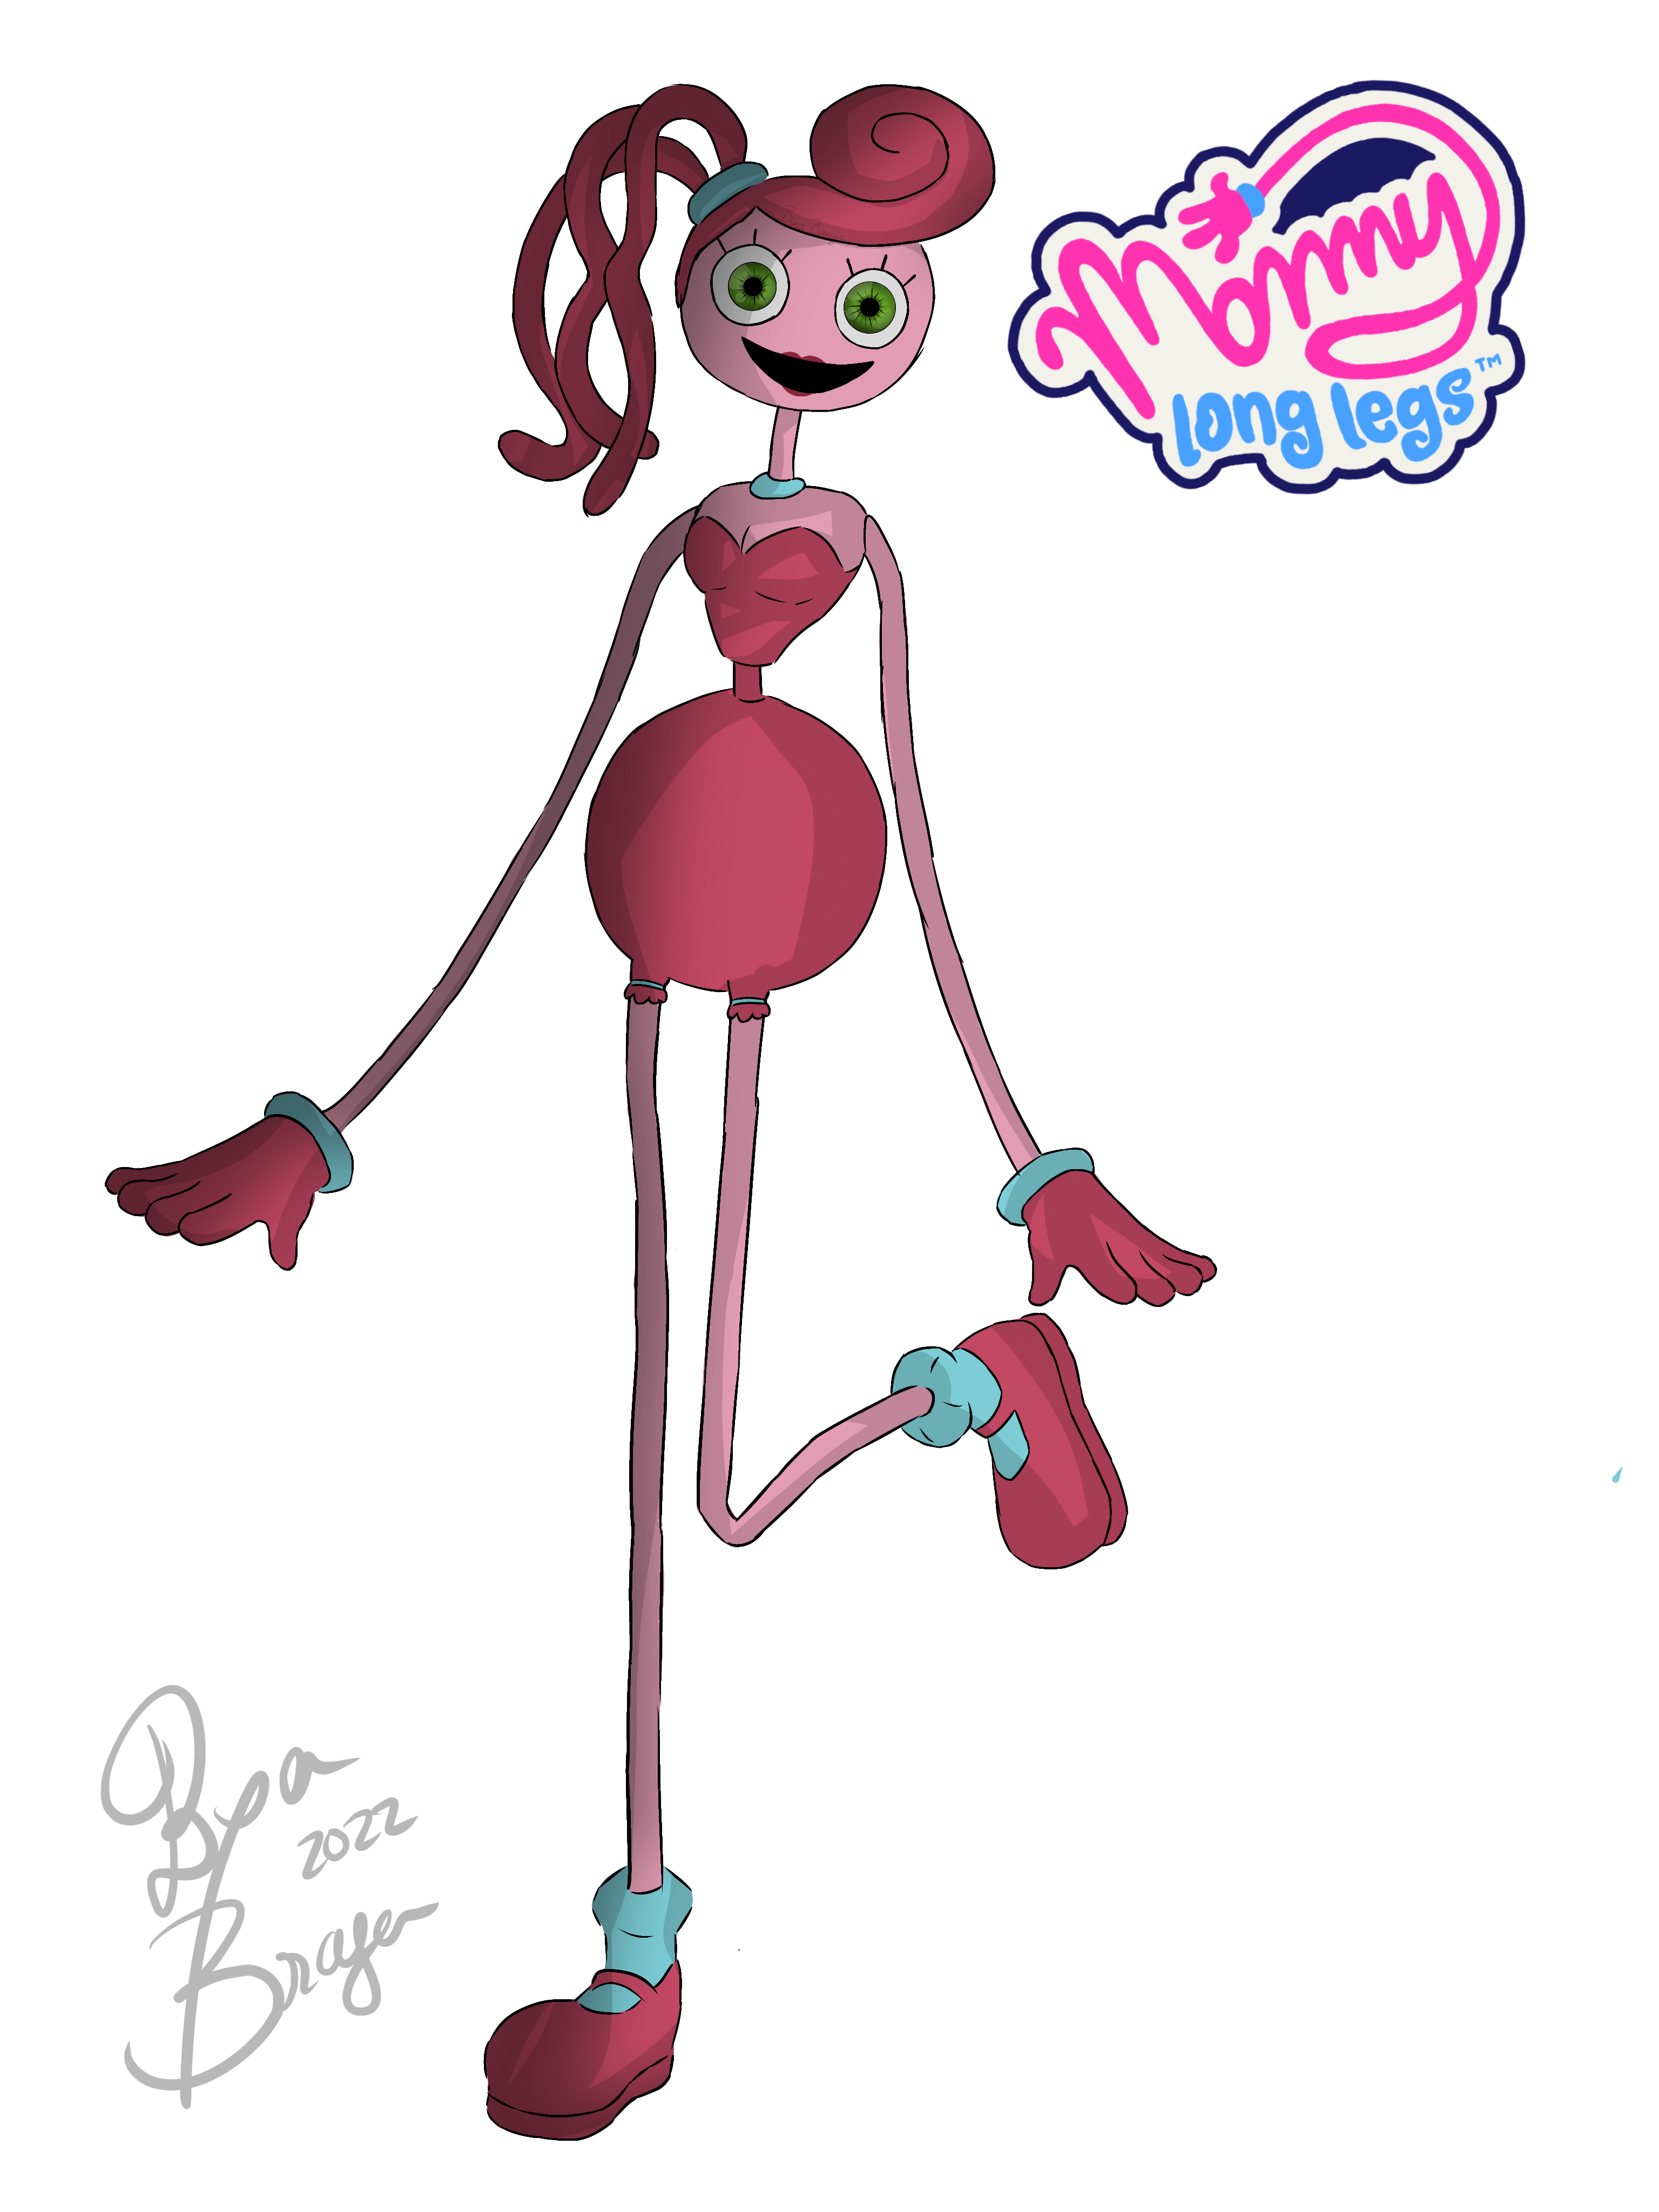 Mommy long legs (Digital drawing made by me: CDII) by CondeDarkII on  DeviantArt